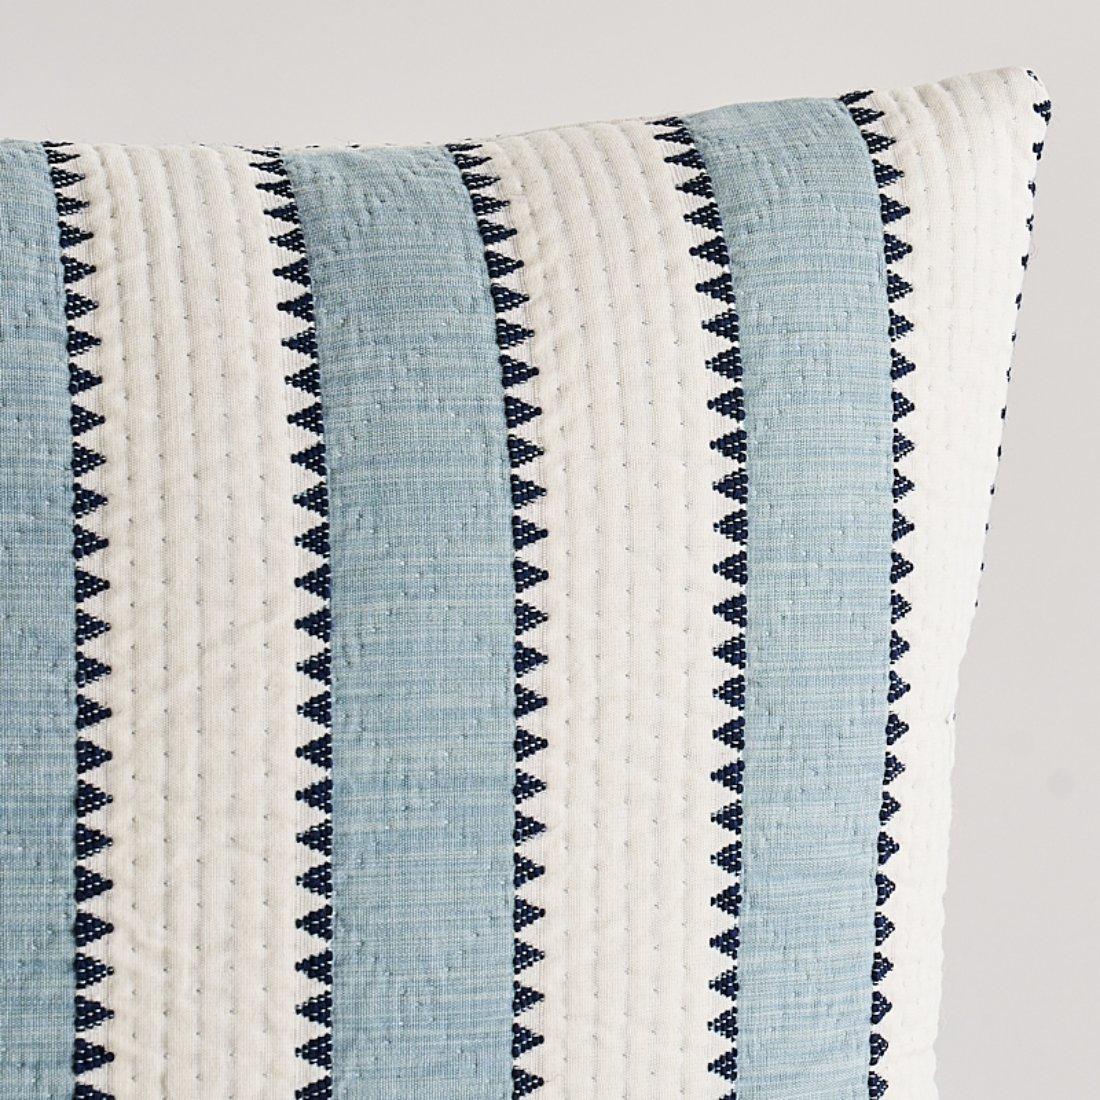 This pillow features Isolde Stripe with a Knife Edge finish. Isolde Stripe is a graphic sawtooth stripe matelassé that's just the right proportion for any kind of upholstery. Pillow includes a feather/down fill insert and hidden zipper